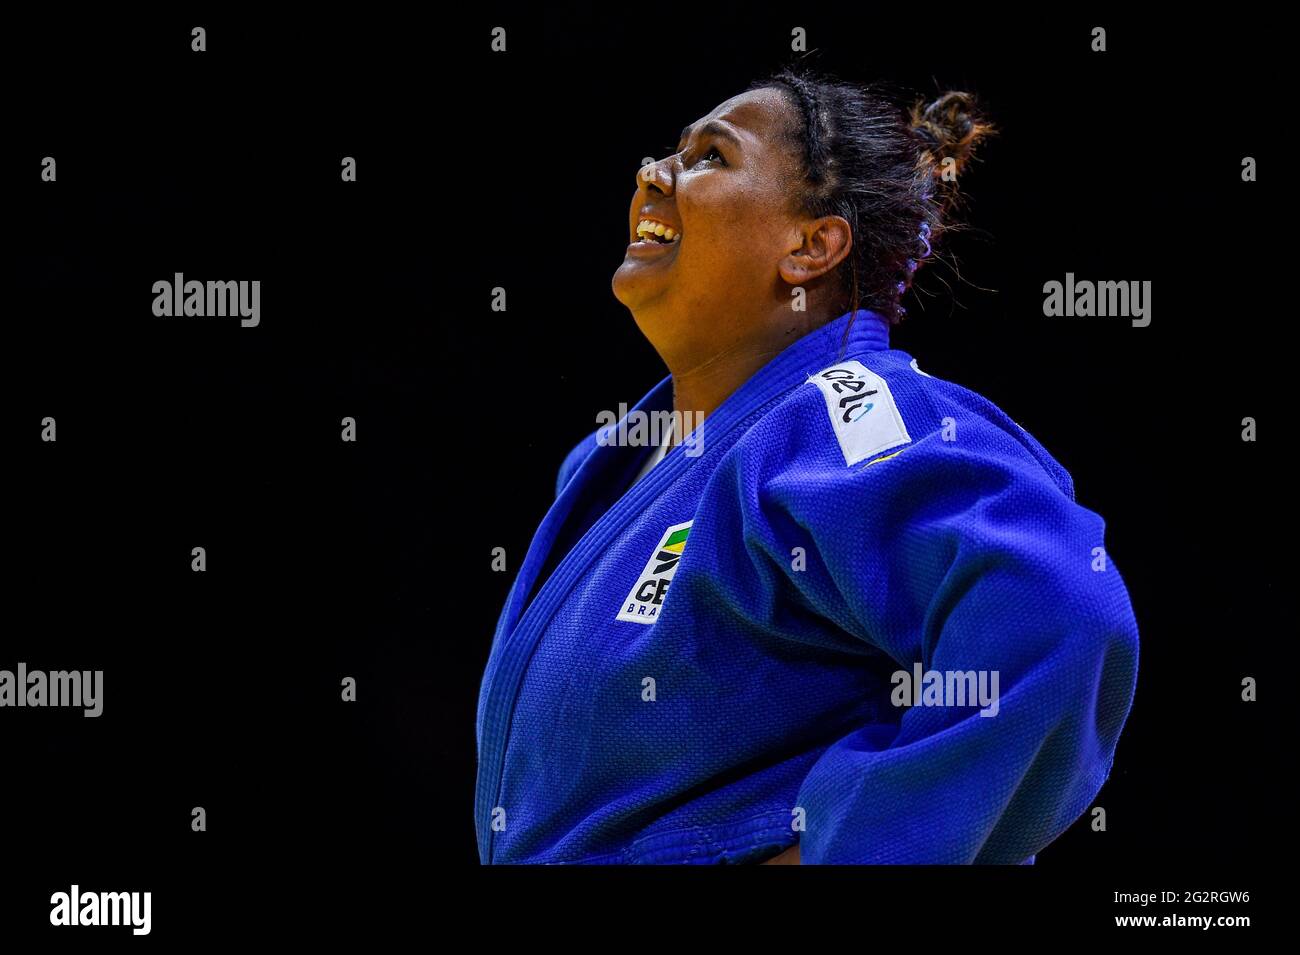 BUDAPEST, HUNGARY - JUNE 12: Beatriz Souza of Brazil wins the bronze medal during the Bronze medal contest for +78 women match of the World Judo Championships Hungary 2021 at Papp Laszlo Budapest Sports Arena  on June 12, 2021 in Budapest, Hungary (Photo by Yannick Verhoeven/Orange Pictures) Credit: Orange Pics BV/Alamy Live News Stock Photo